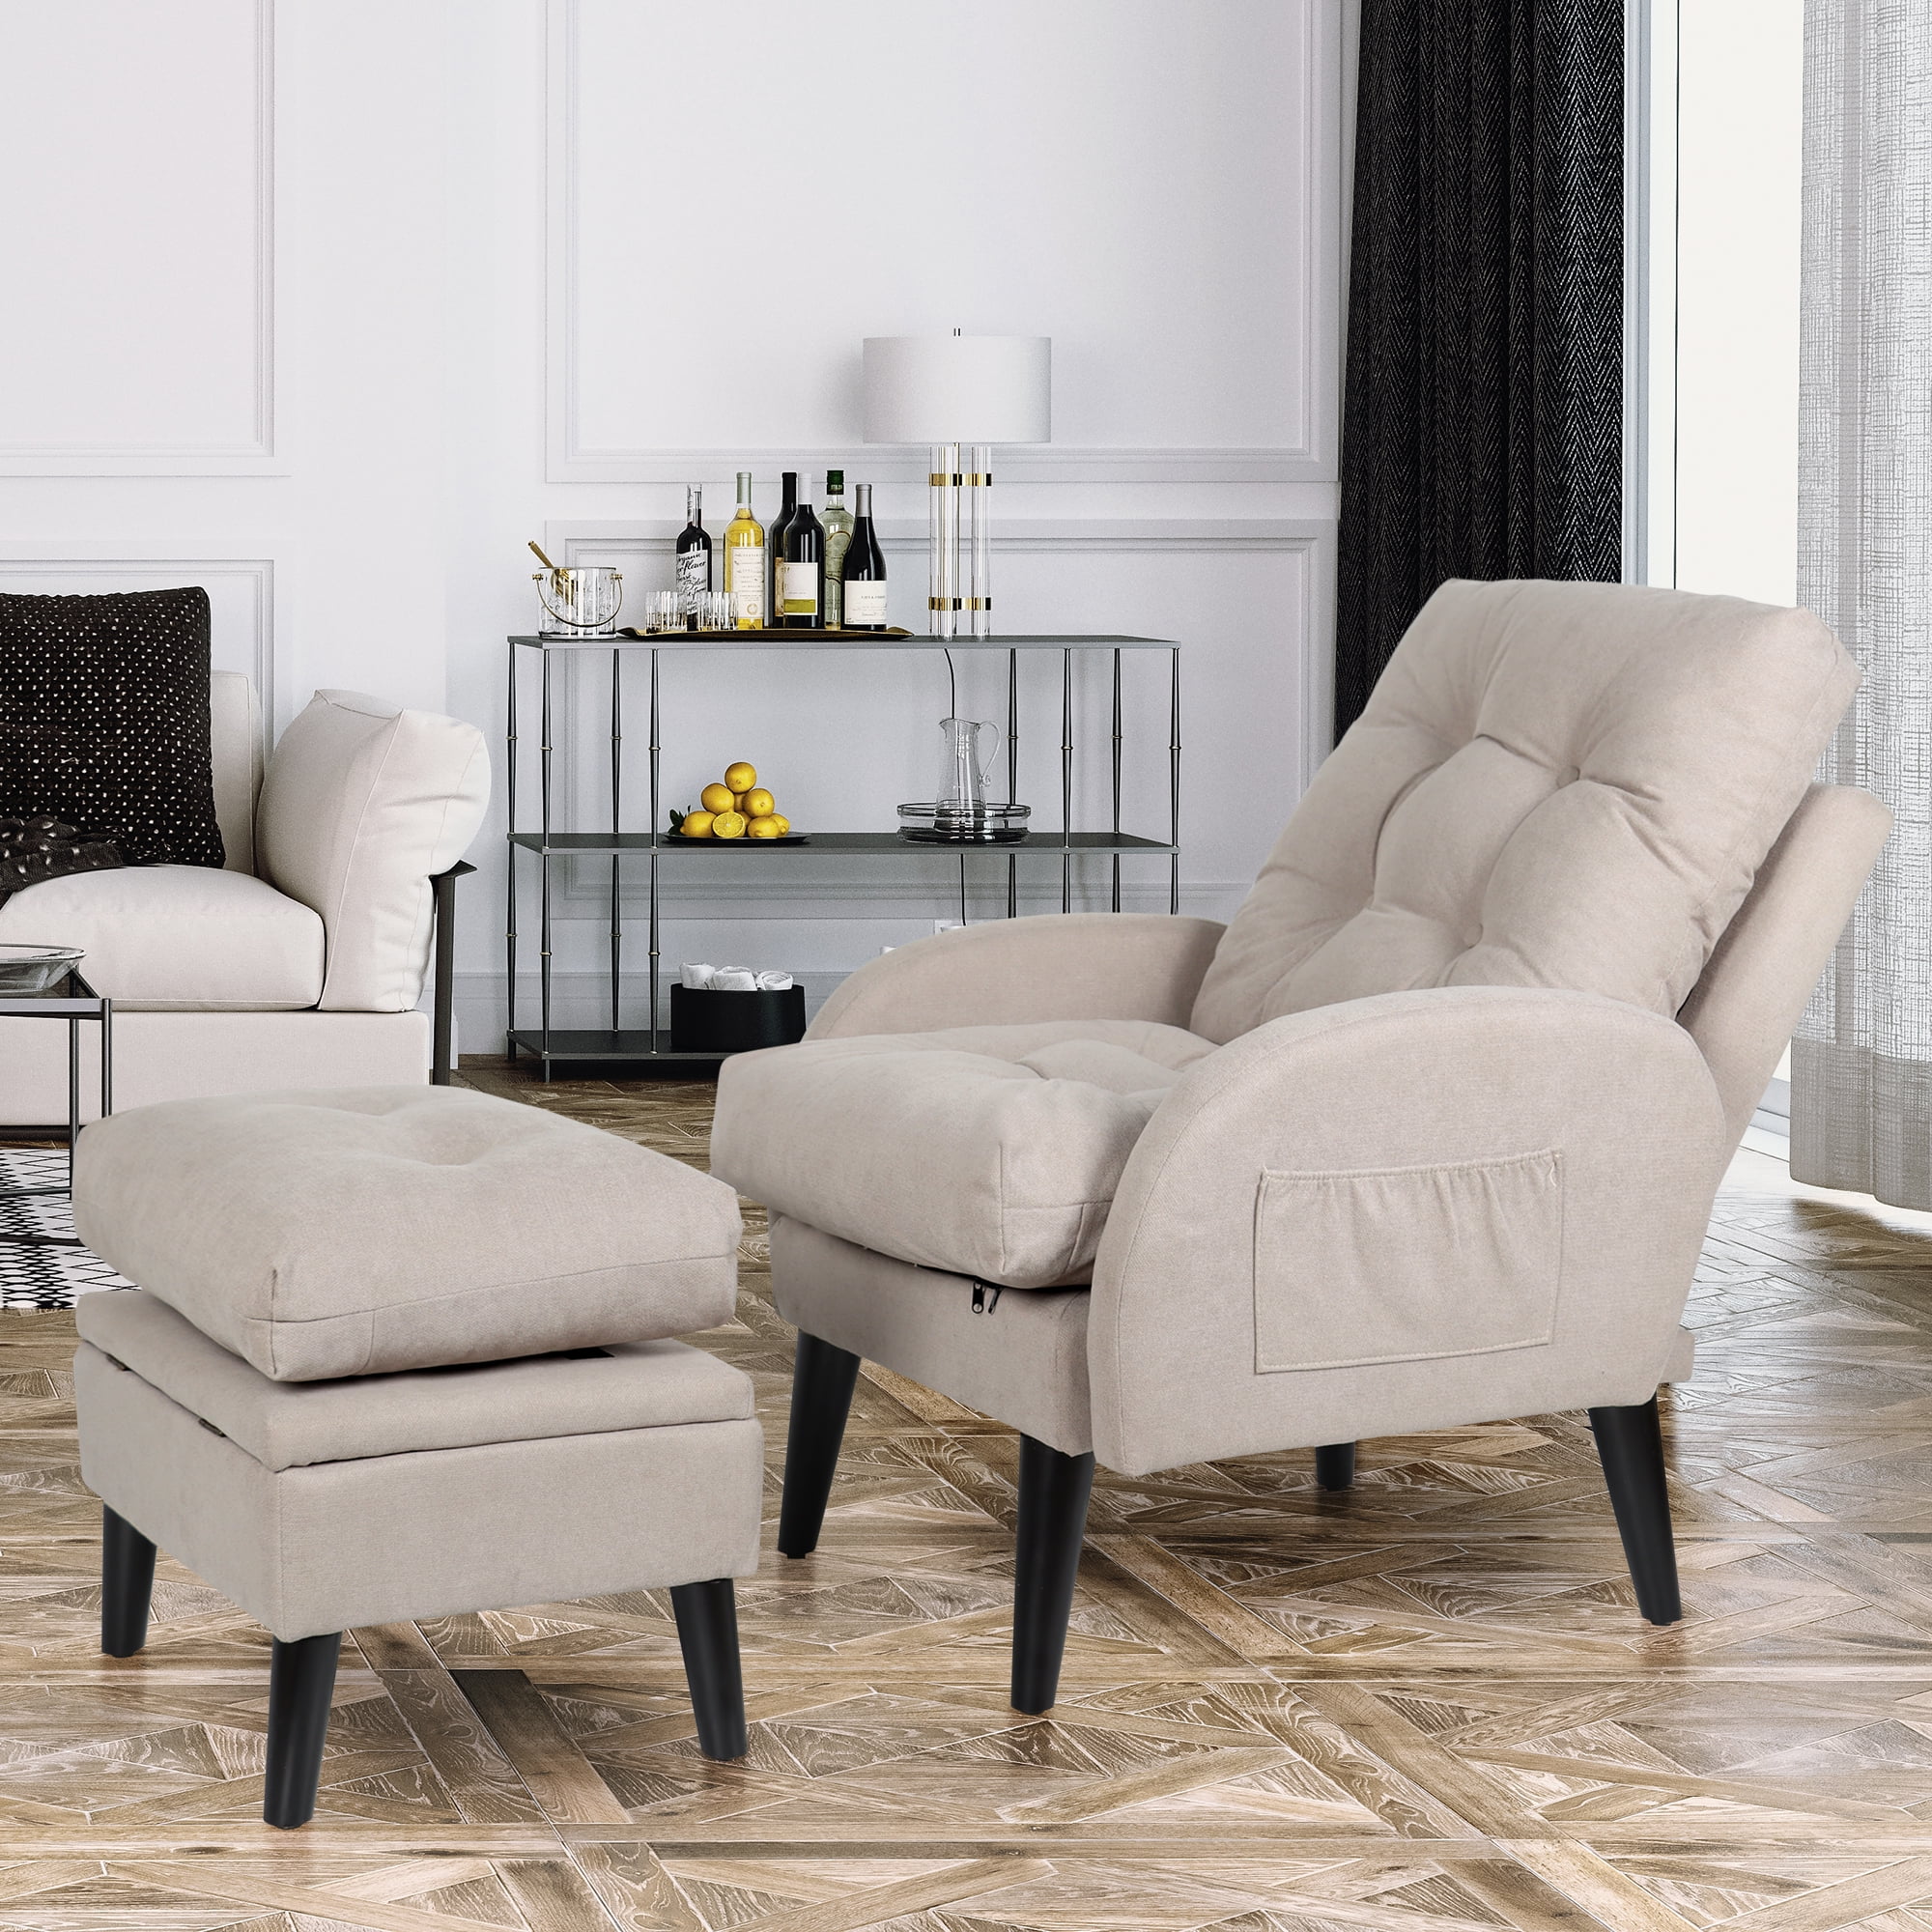 24 5 Wide Accent Chair With Ottoman, Large Living Room Chairs With Ottoman